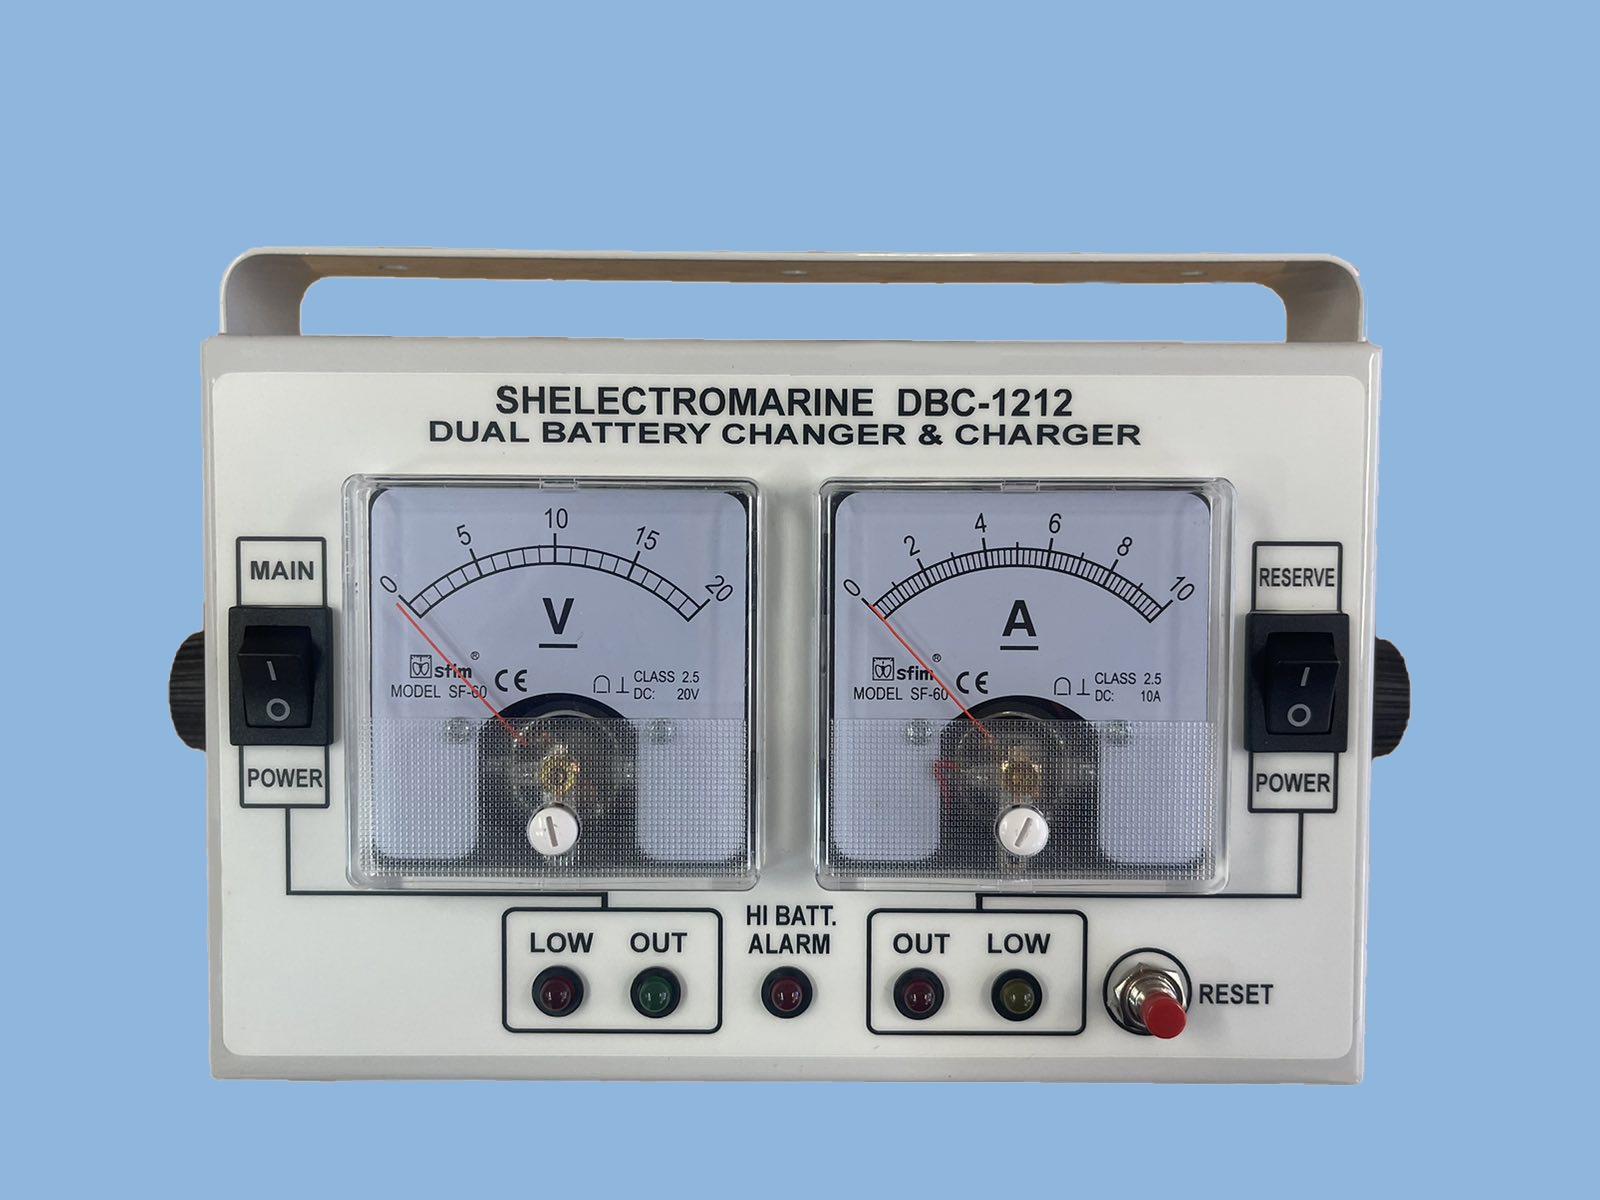 DC/DC DUAL BATTERY CHANGERS AND CHARGERS – SHELECTRO